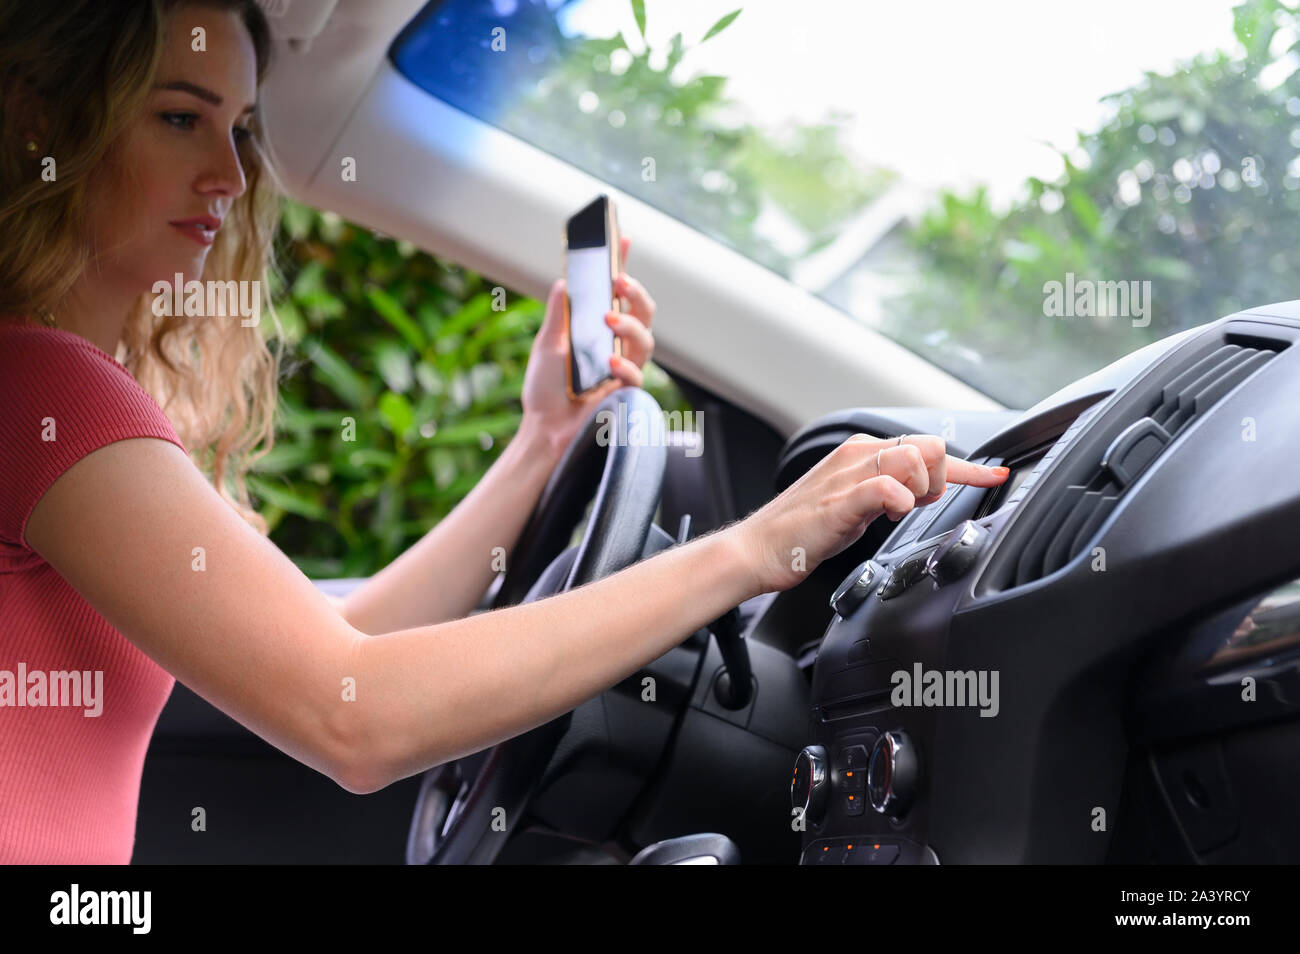 Young woman using smart phone and touchscreen in car Stock Photo